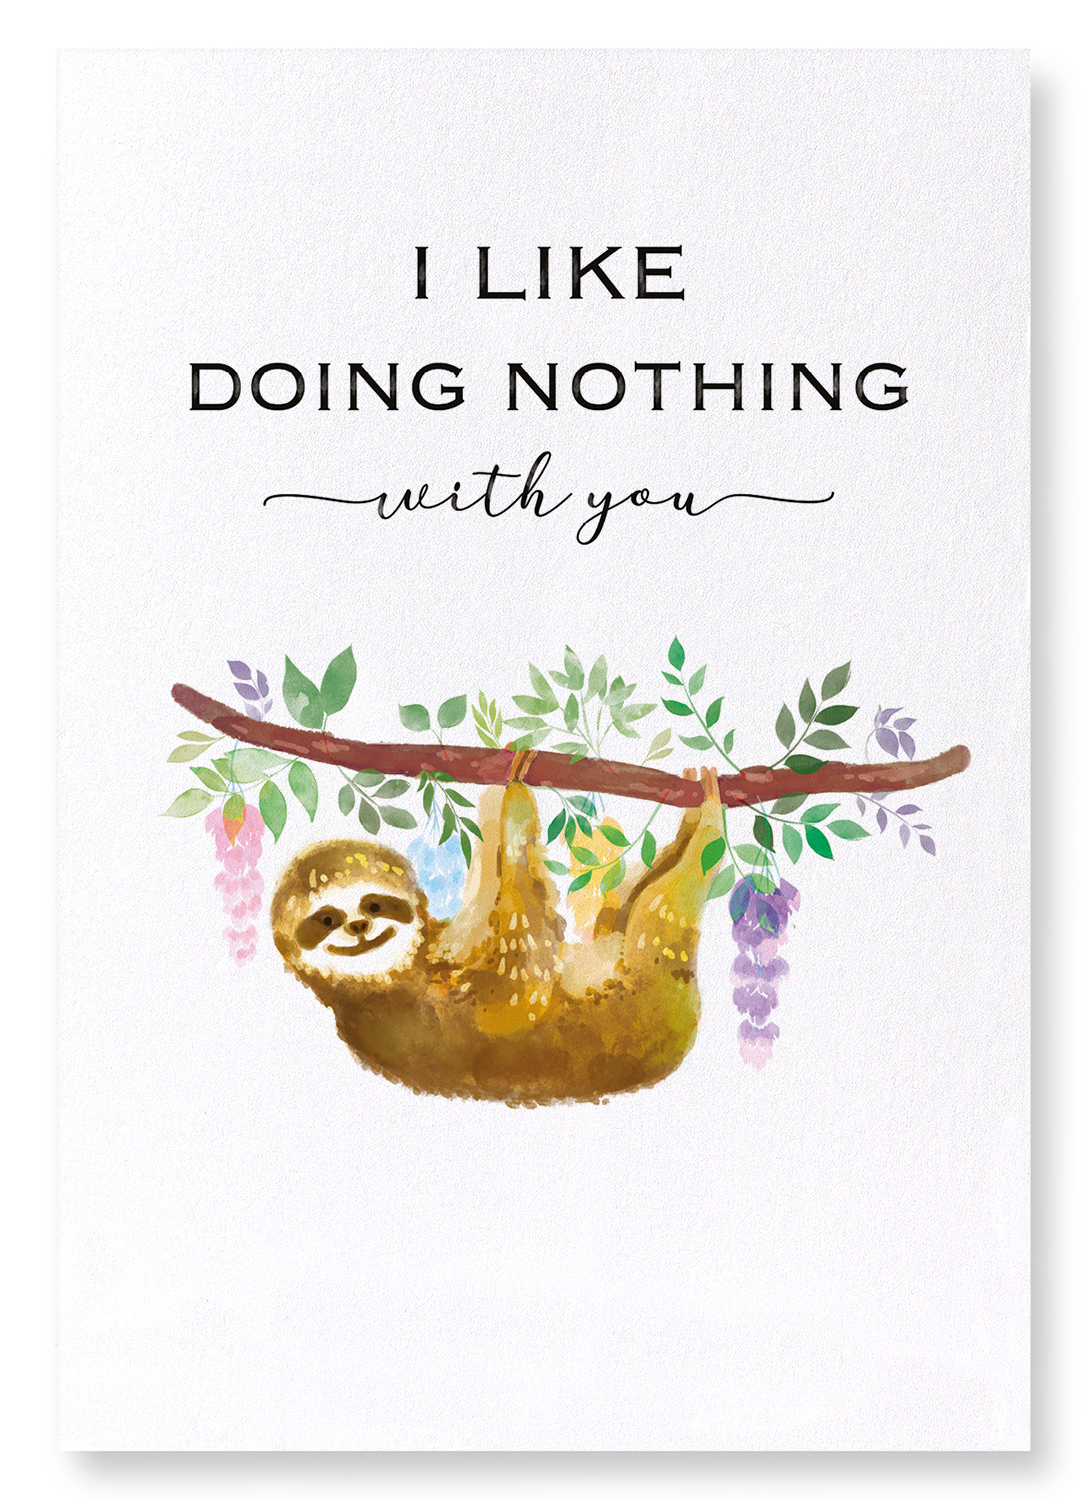 DOING NOTHING WITH YOU: Watercolour Art Print